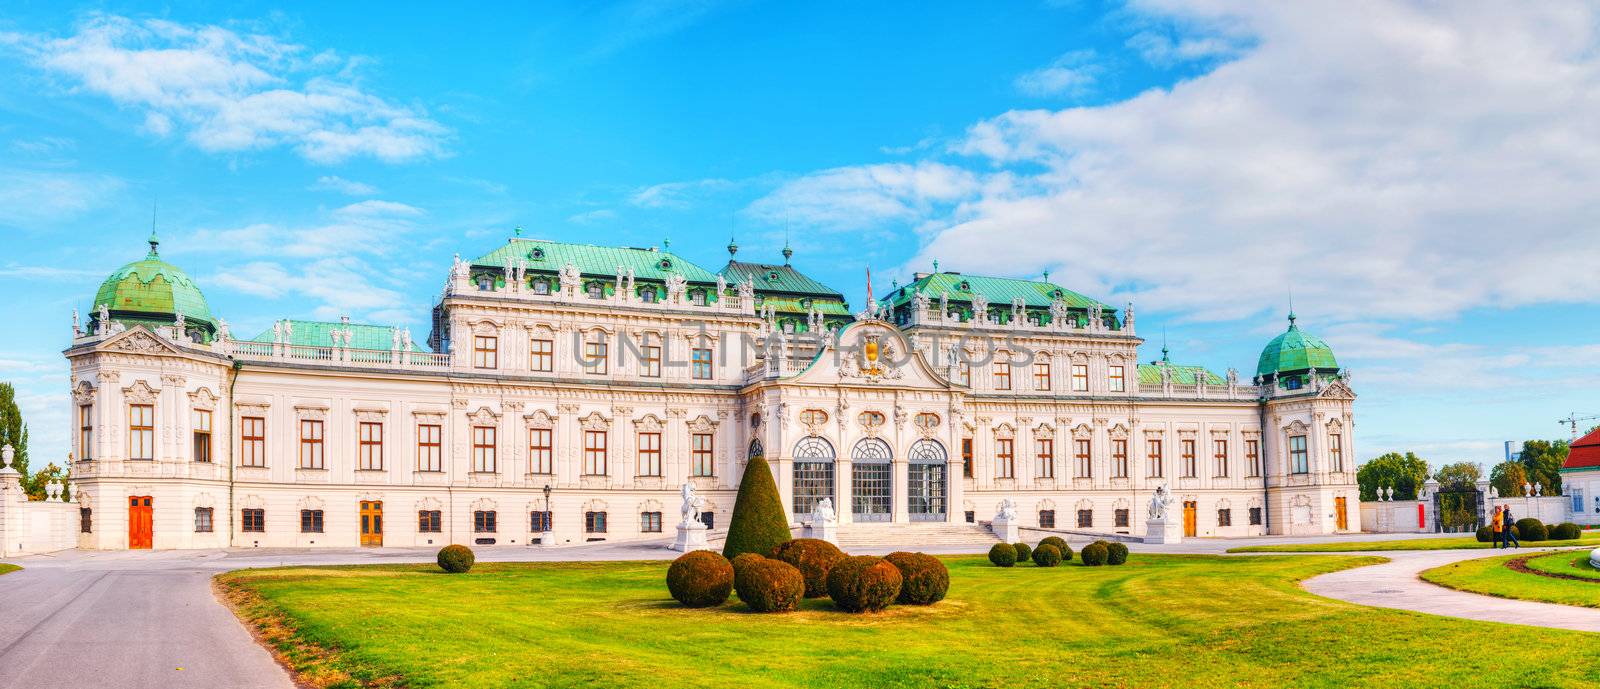 Belvedere palace in Vienna, Austria by AndreyKr